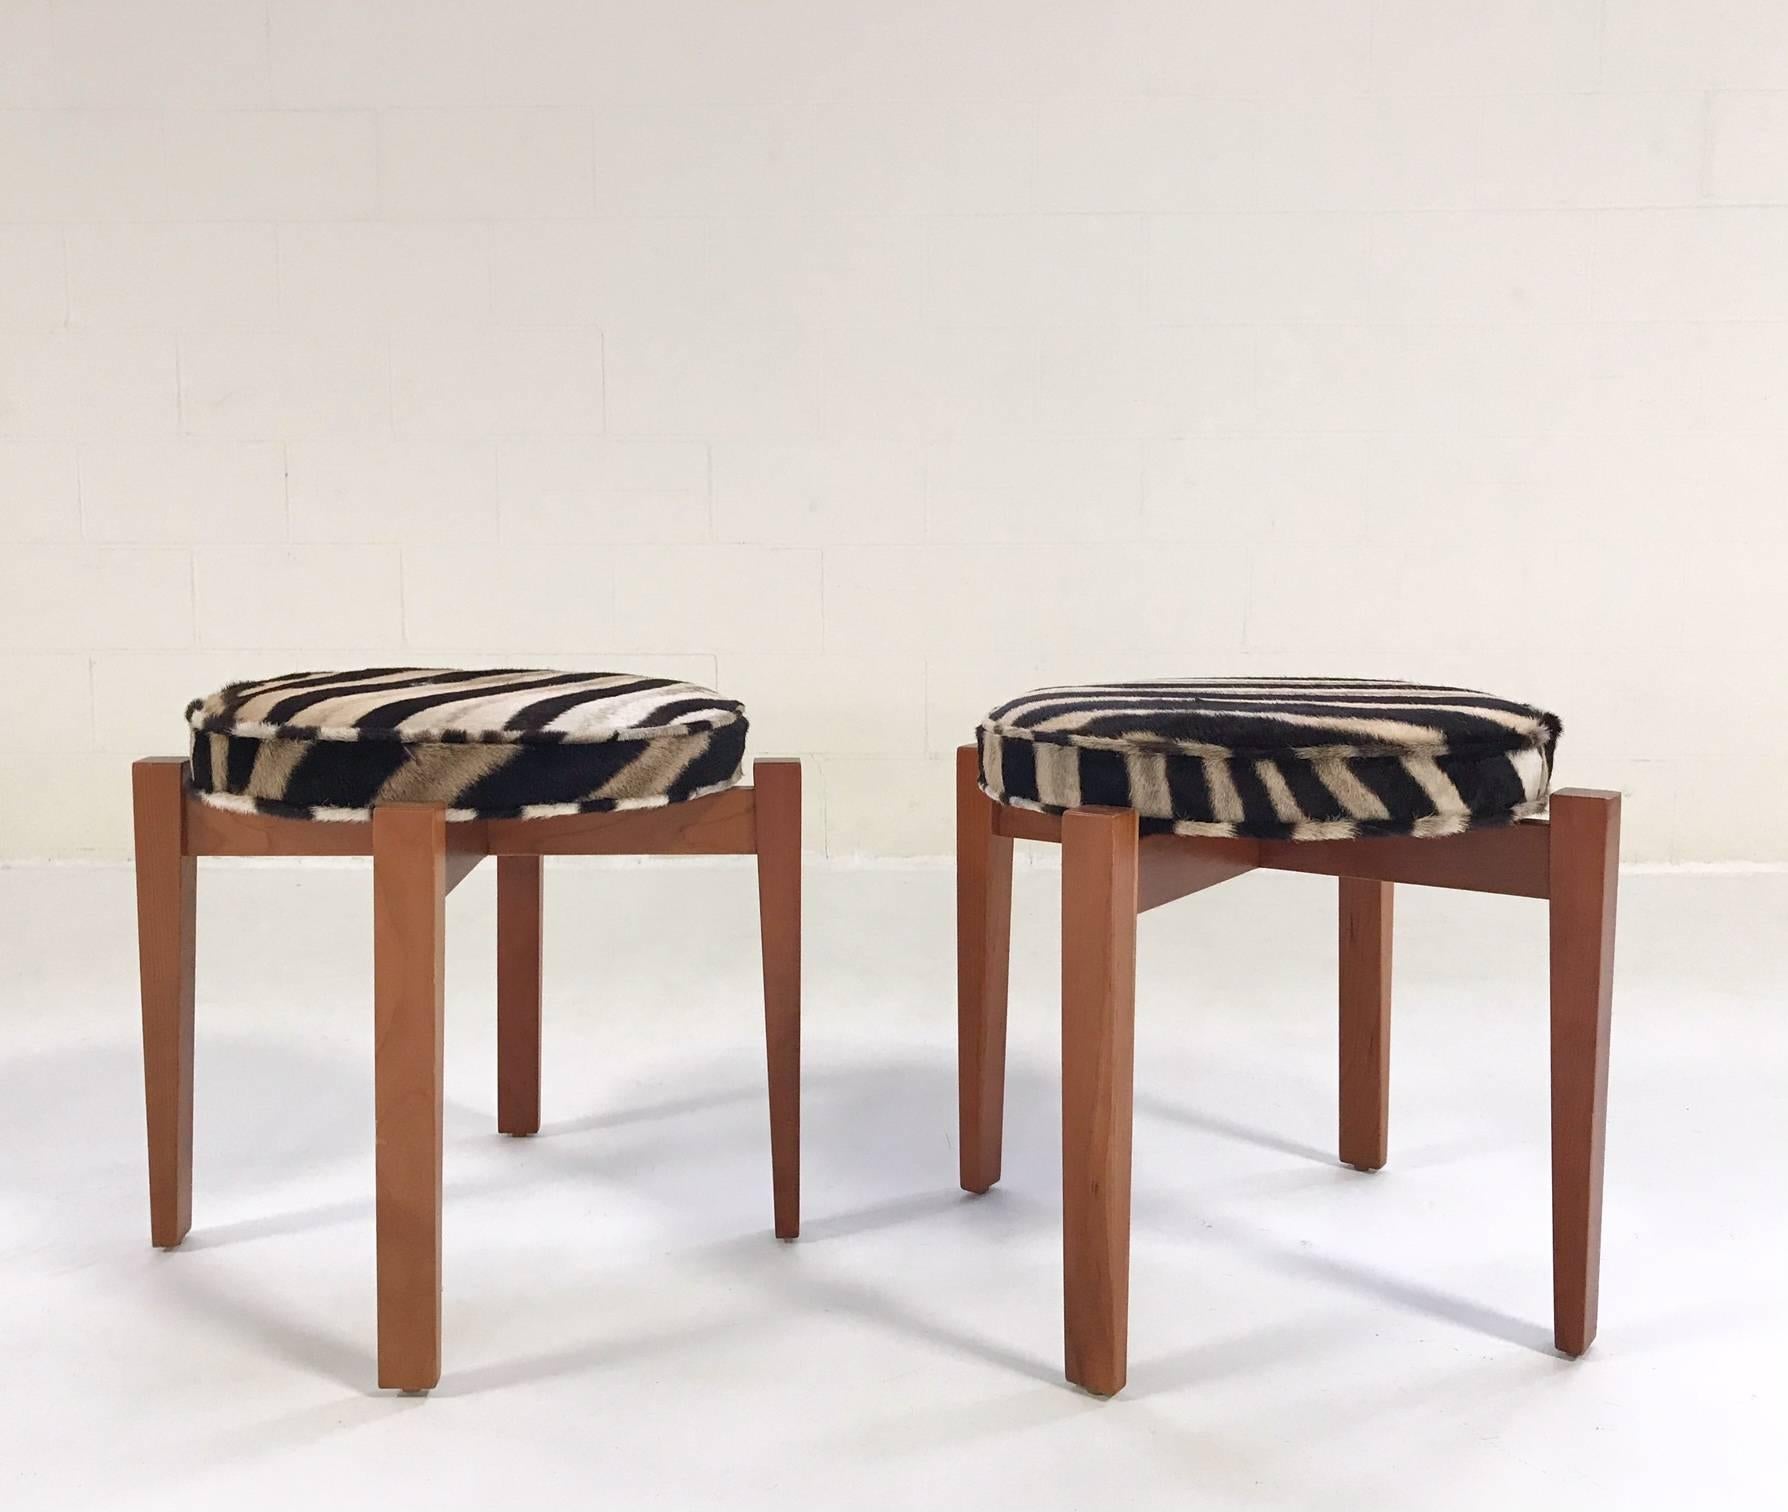 This set of walnut stools was designed in 2007 by Jens Risom for Ralph Pucci. They were originally designed for Philip Johnson's Glass House in New Canaan, CT. Expertly restored and reupholstered in zebra hide, these stools are amazing, a beautiful